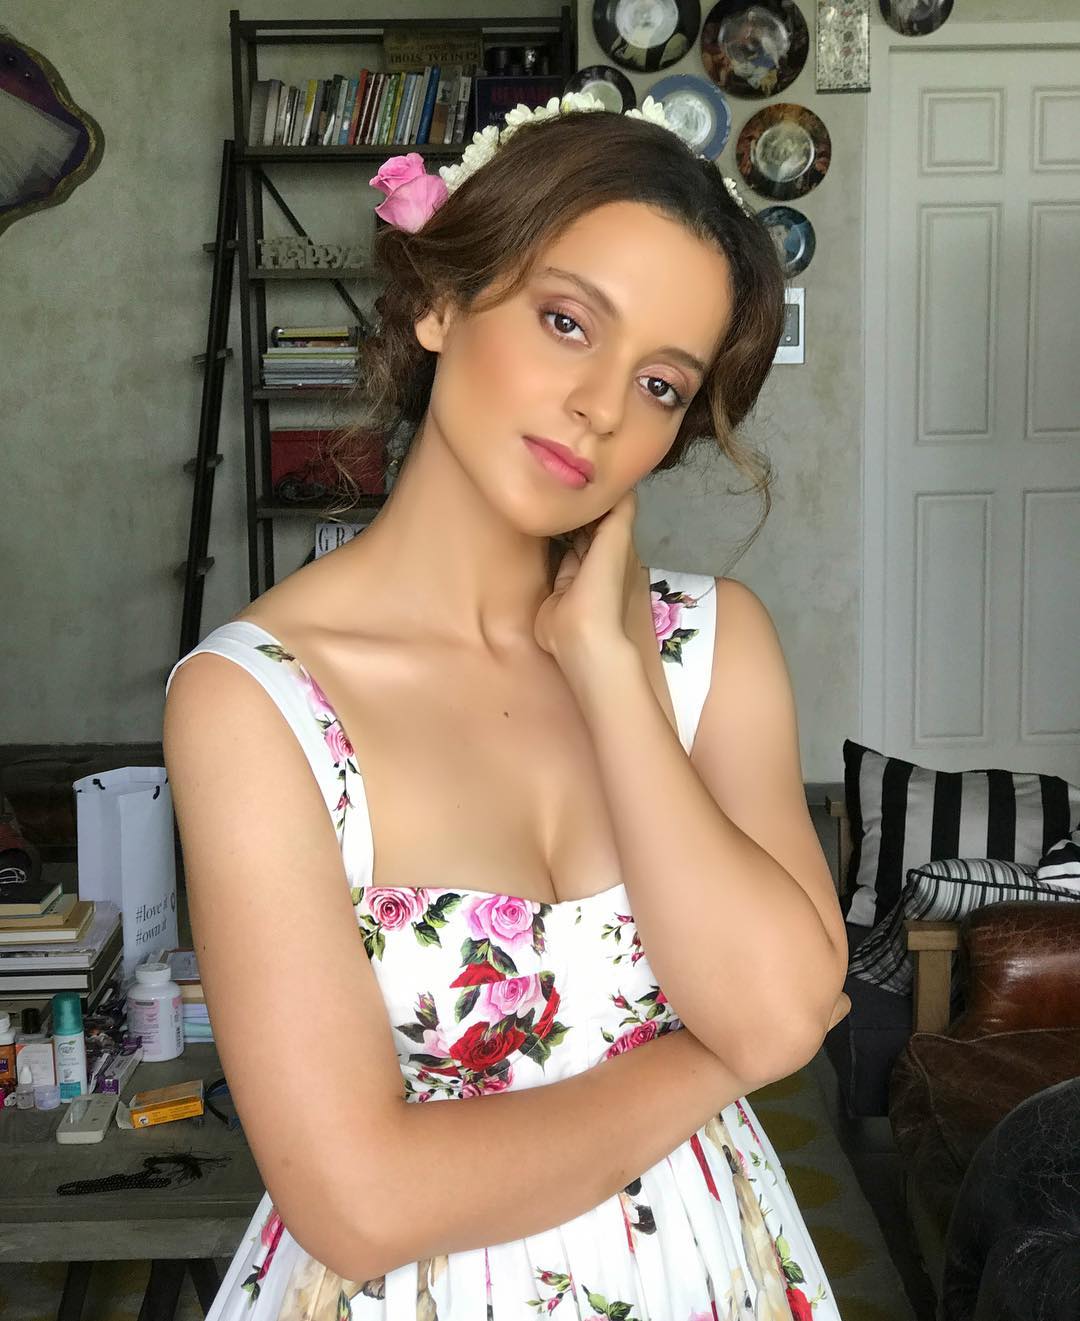 Kangana Ranaut makes a bold statement in this spicy, colour-blocked ensemble